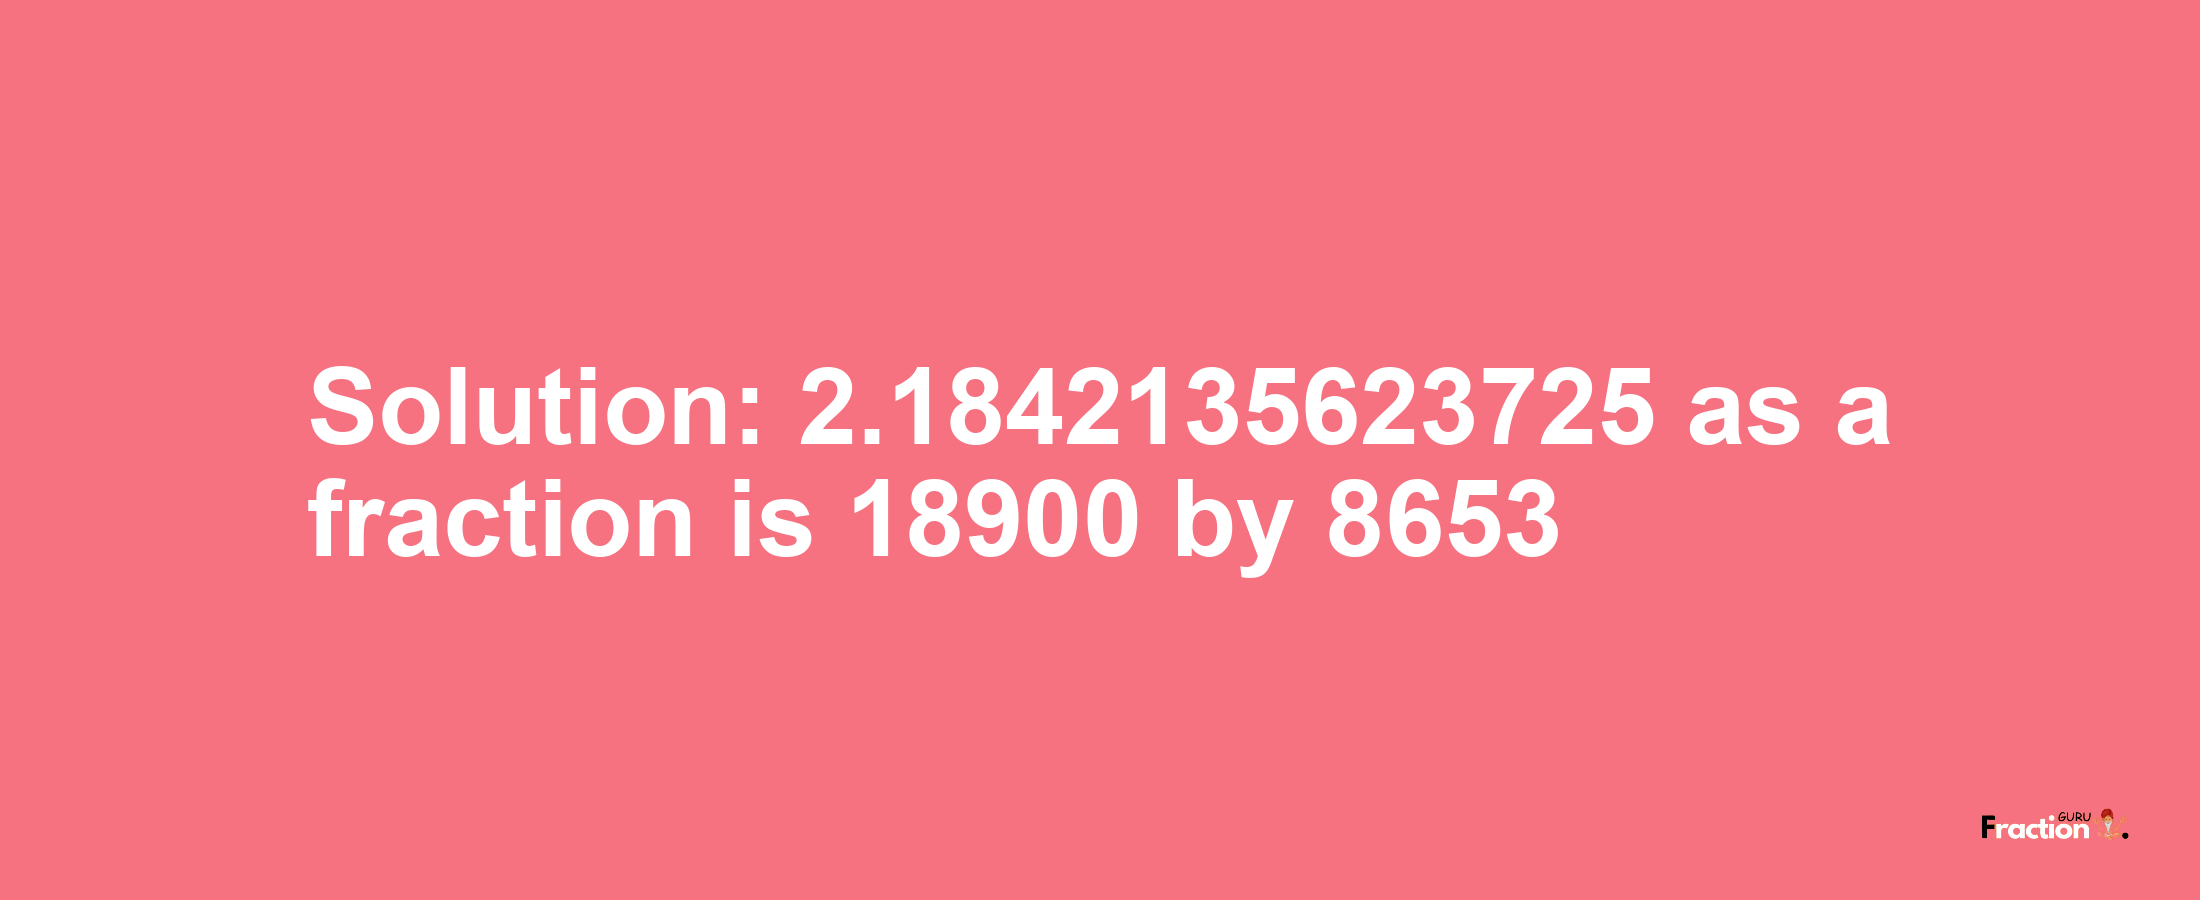 Solution:2.1842135623725 as a fraction is 18900/8653